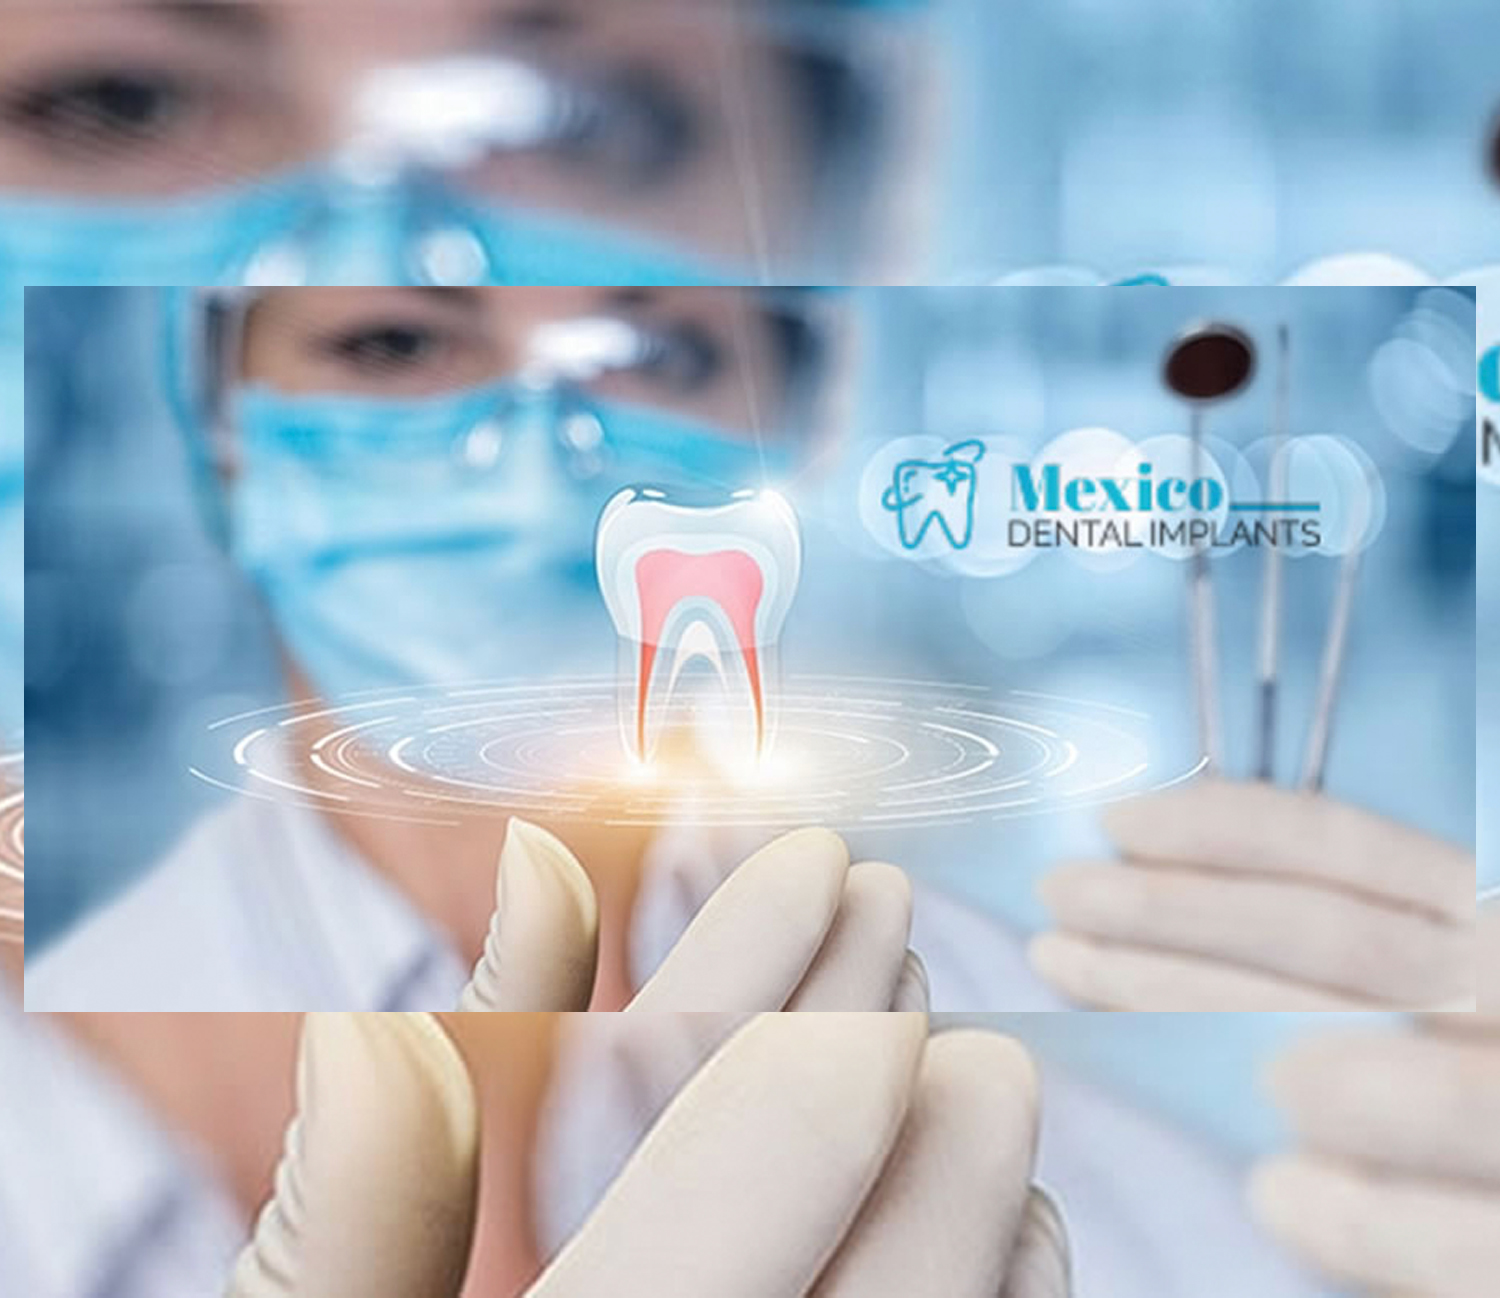 Mexico Dental Implants logo featured on top of an image of a dental care professional holding tools and wearing gloves and goggles.